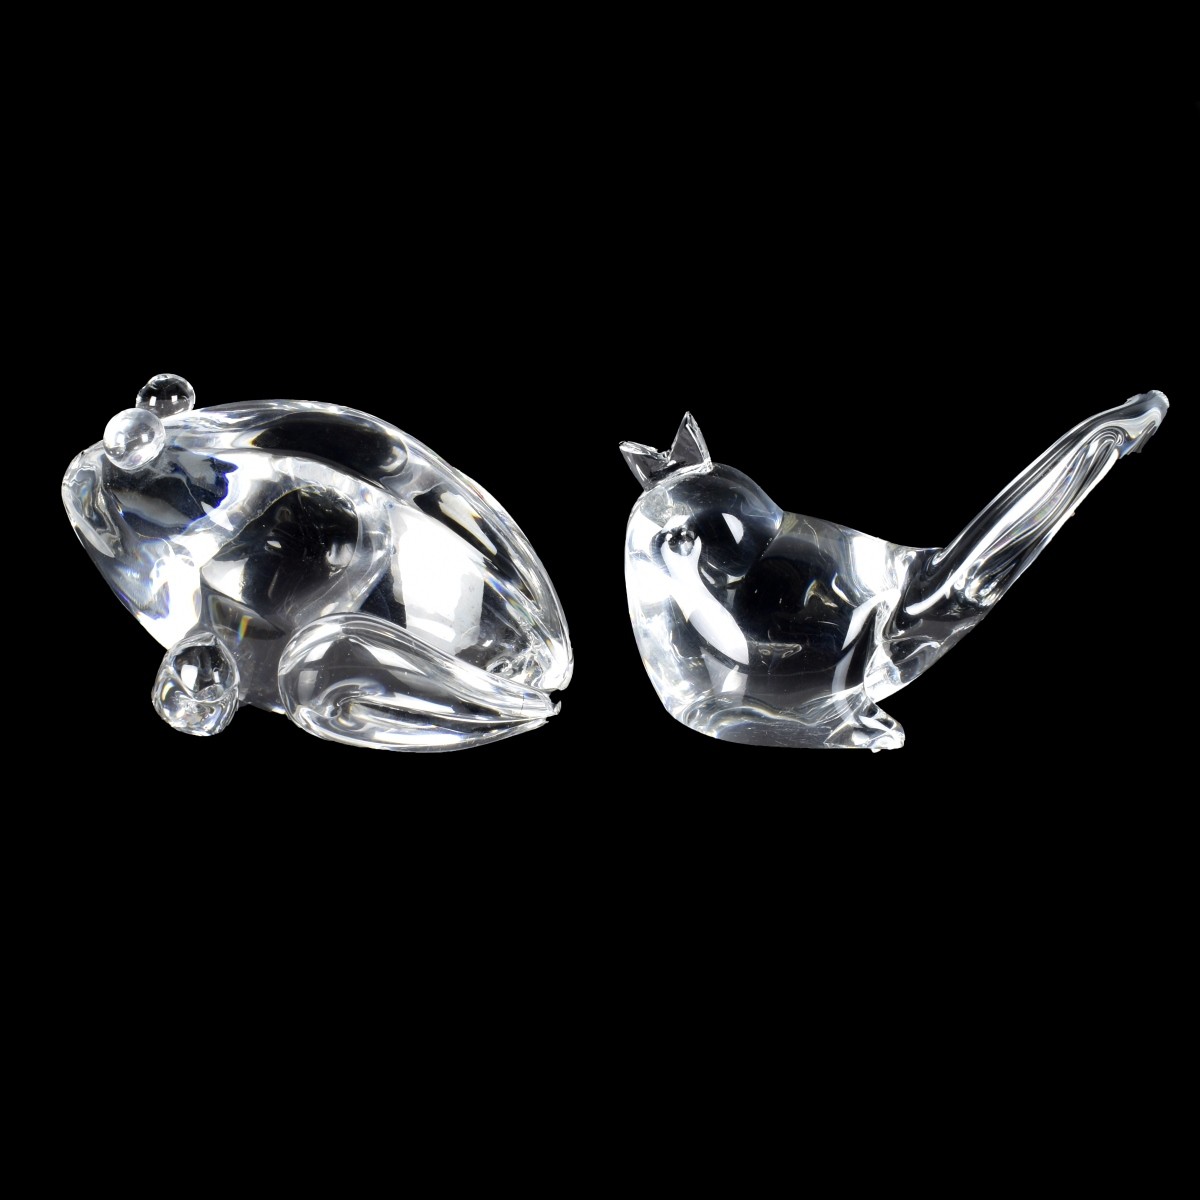 Two Steuben Crystal Figurines